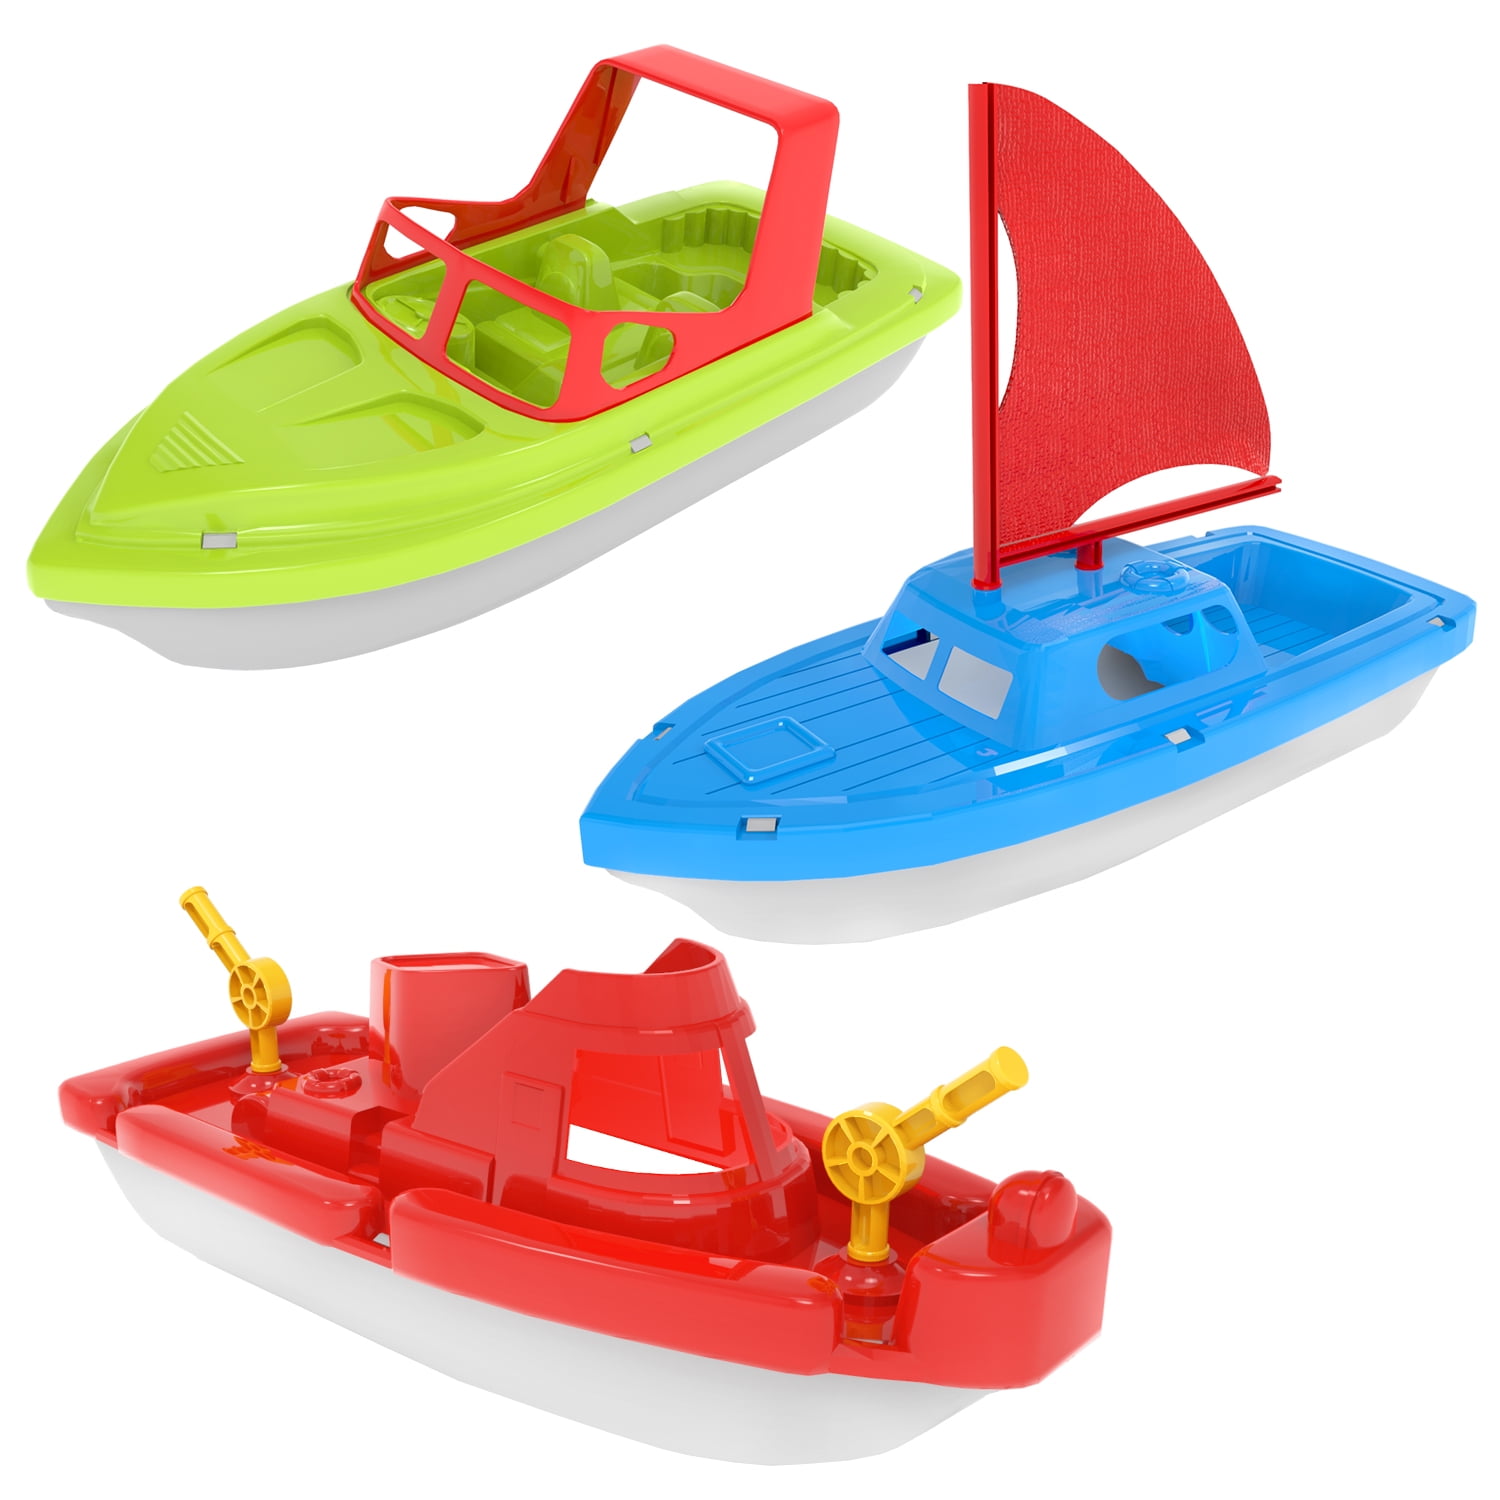 Fun Little Toys 3 Pcs Bath Boat Toy, Pool Toy,Speed Boat, Sailing